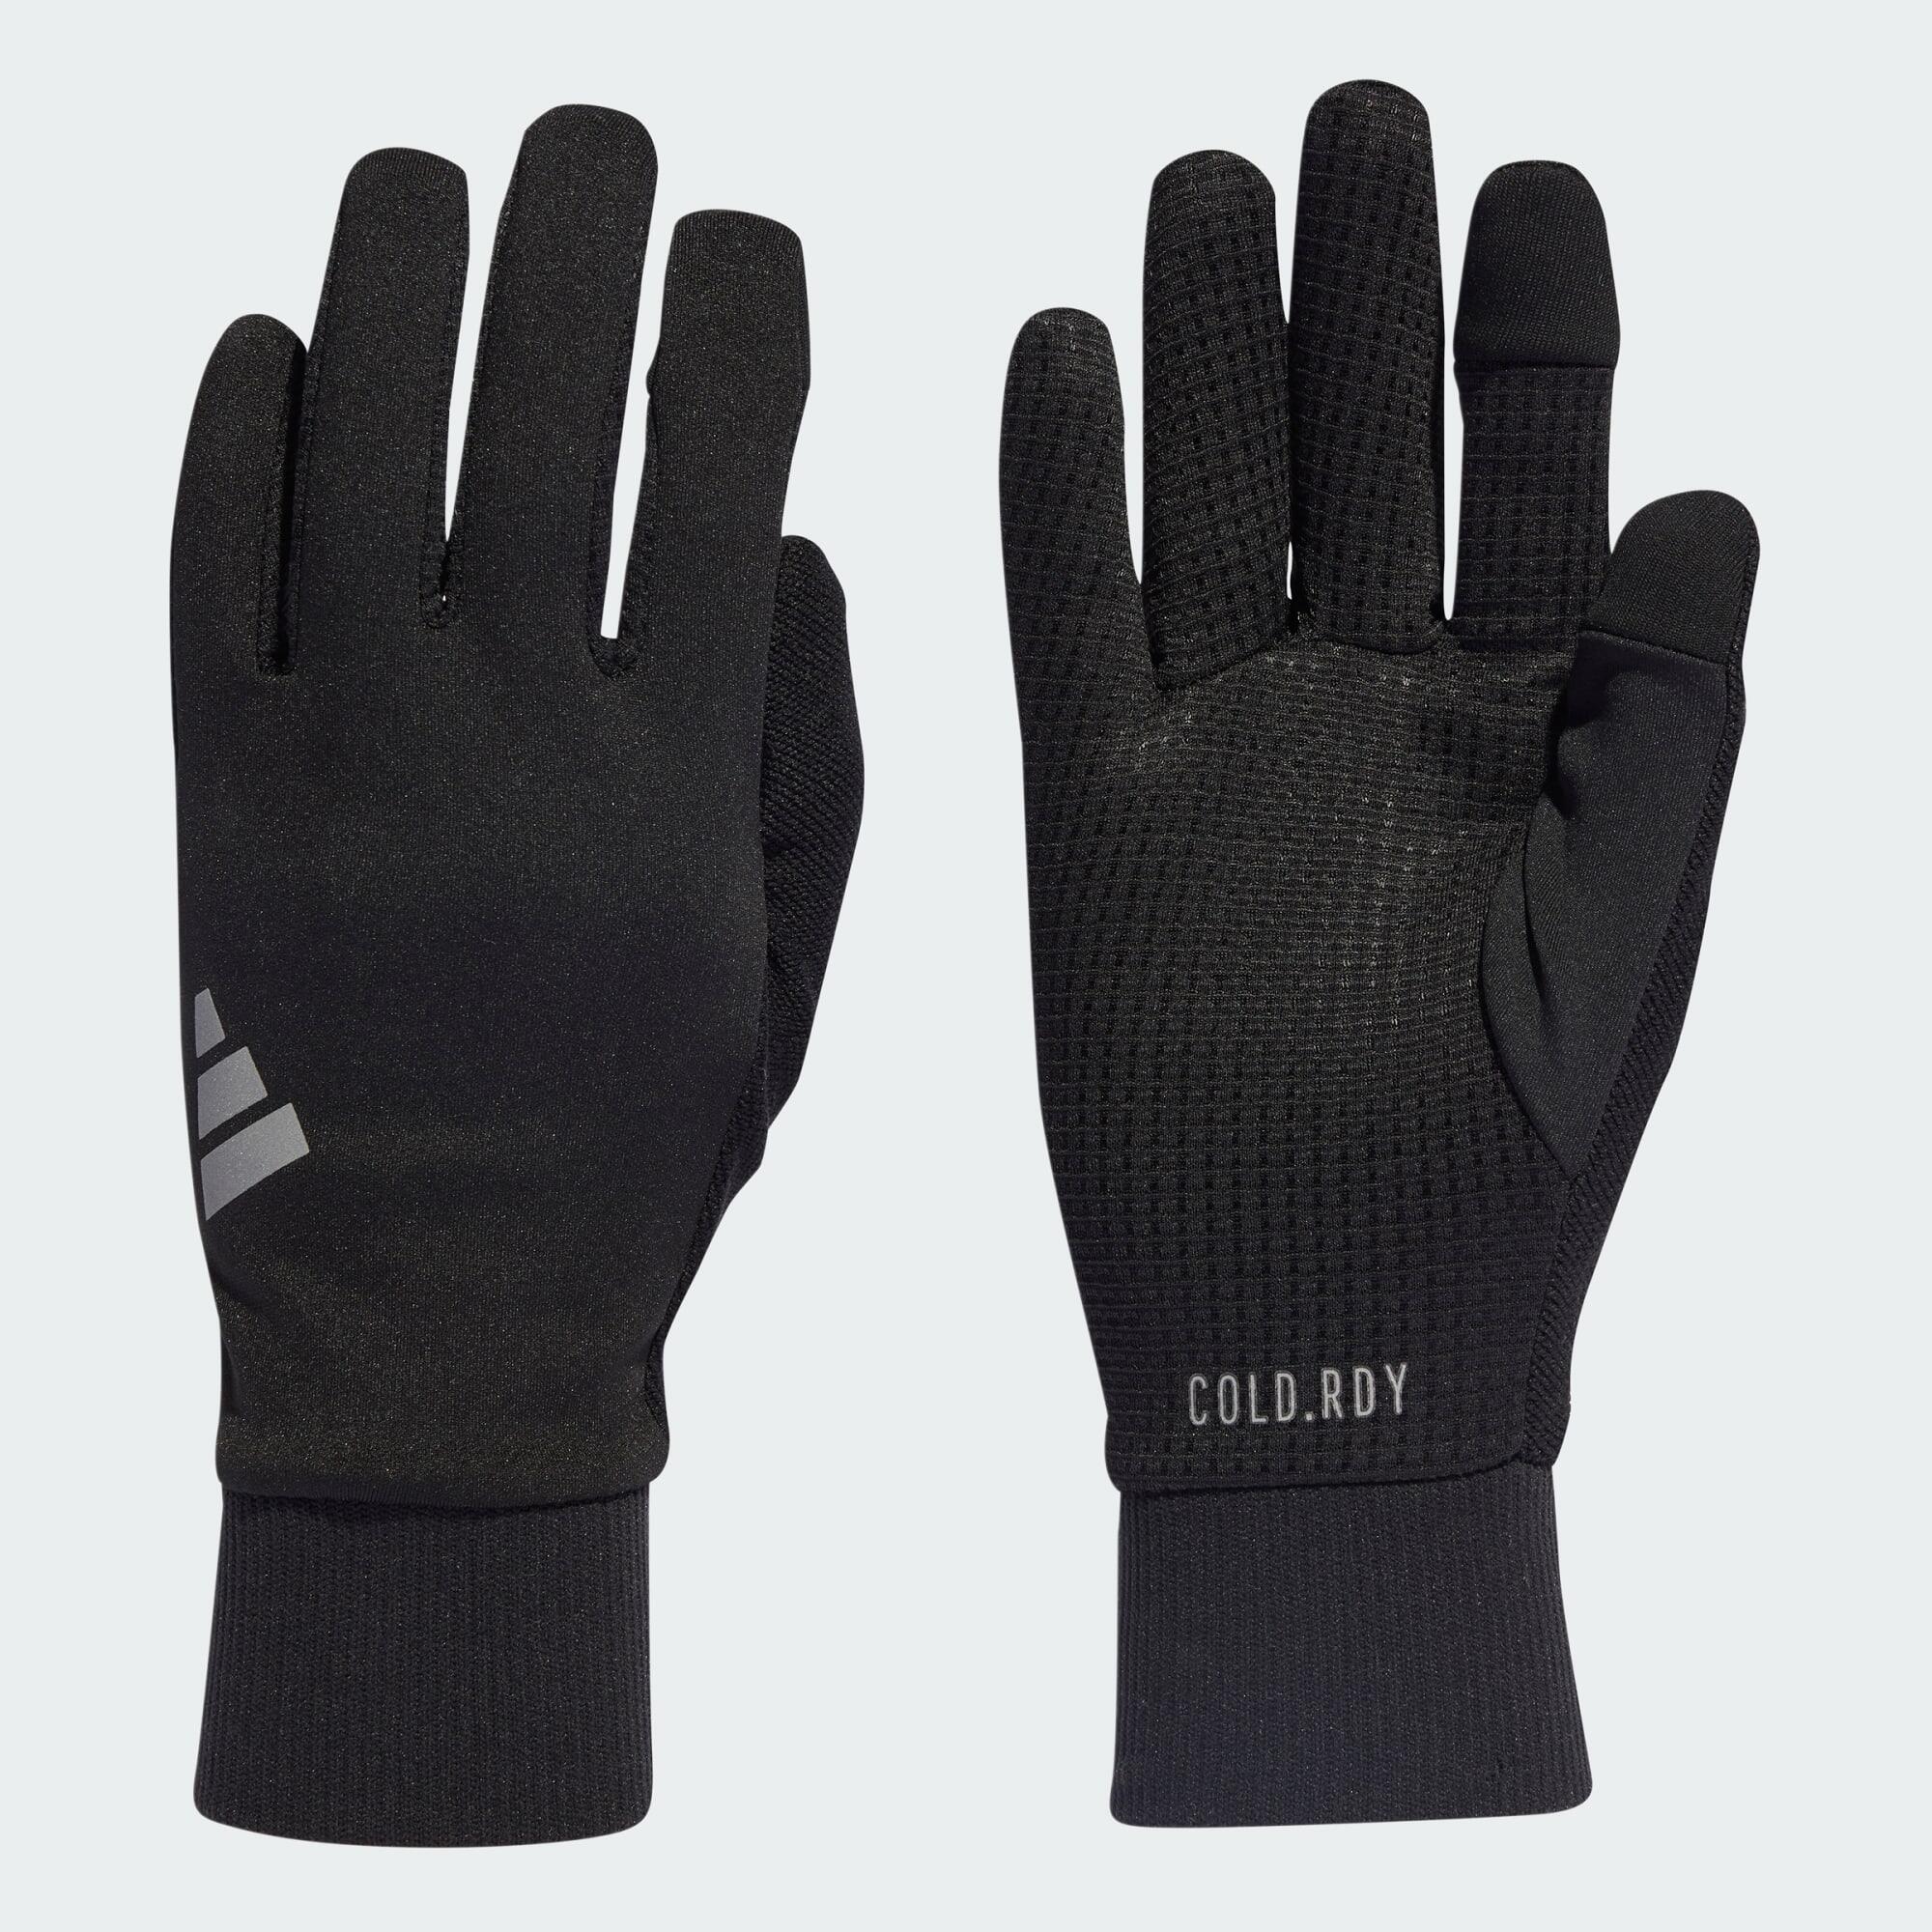 COLD.RDY Reflective Detail Running Gloves 5/5